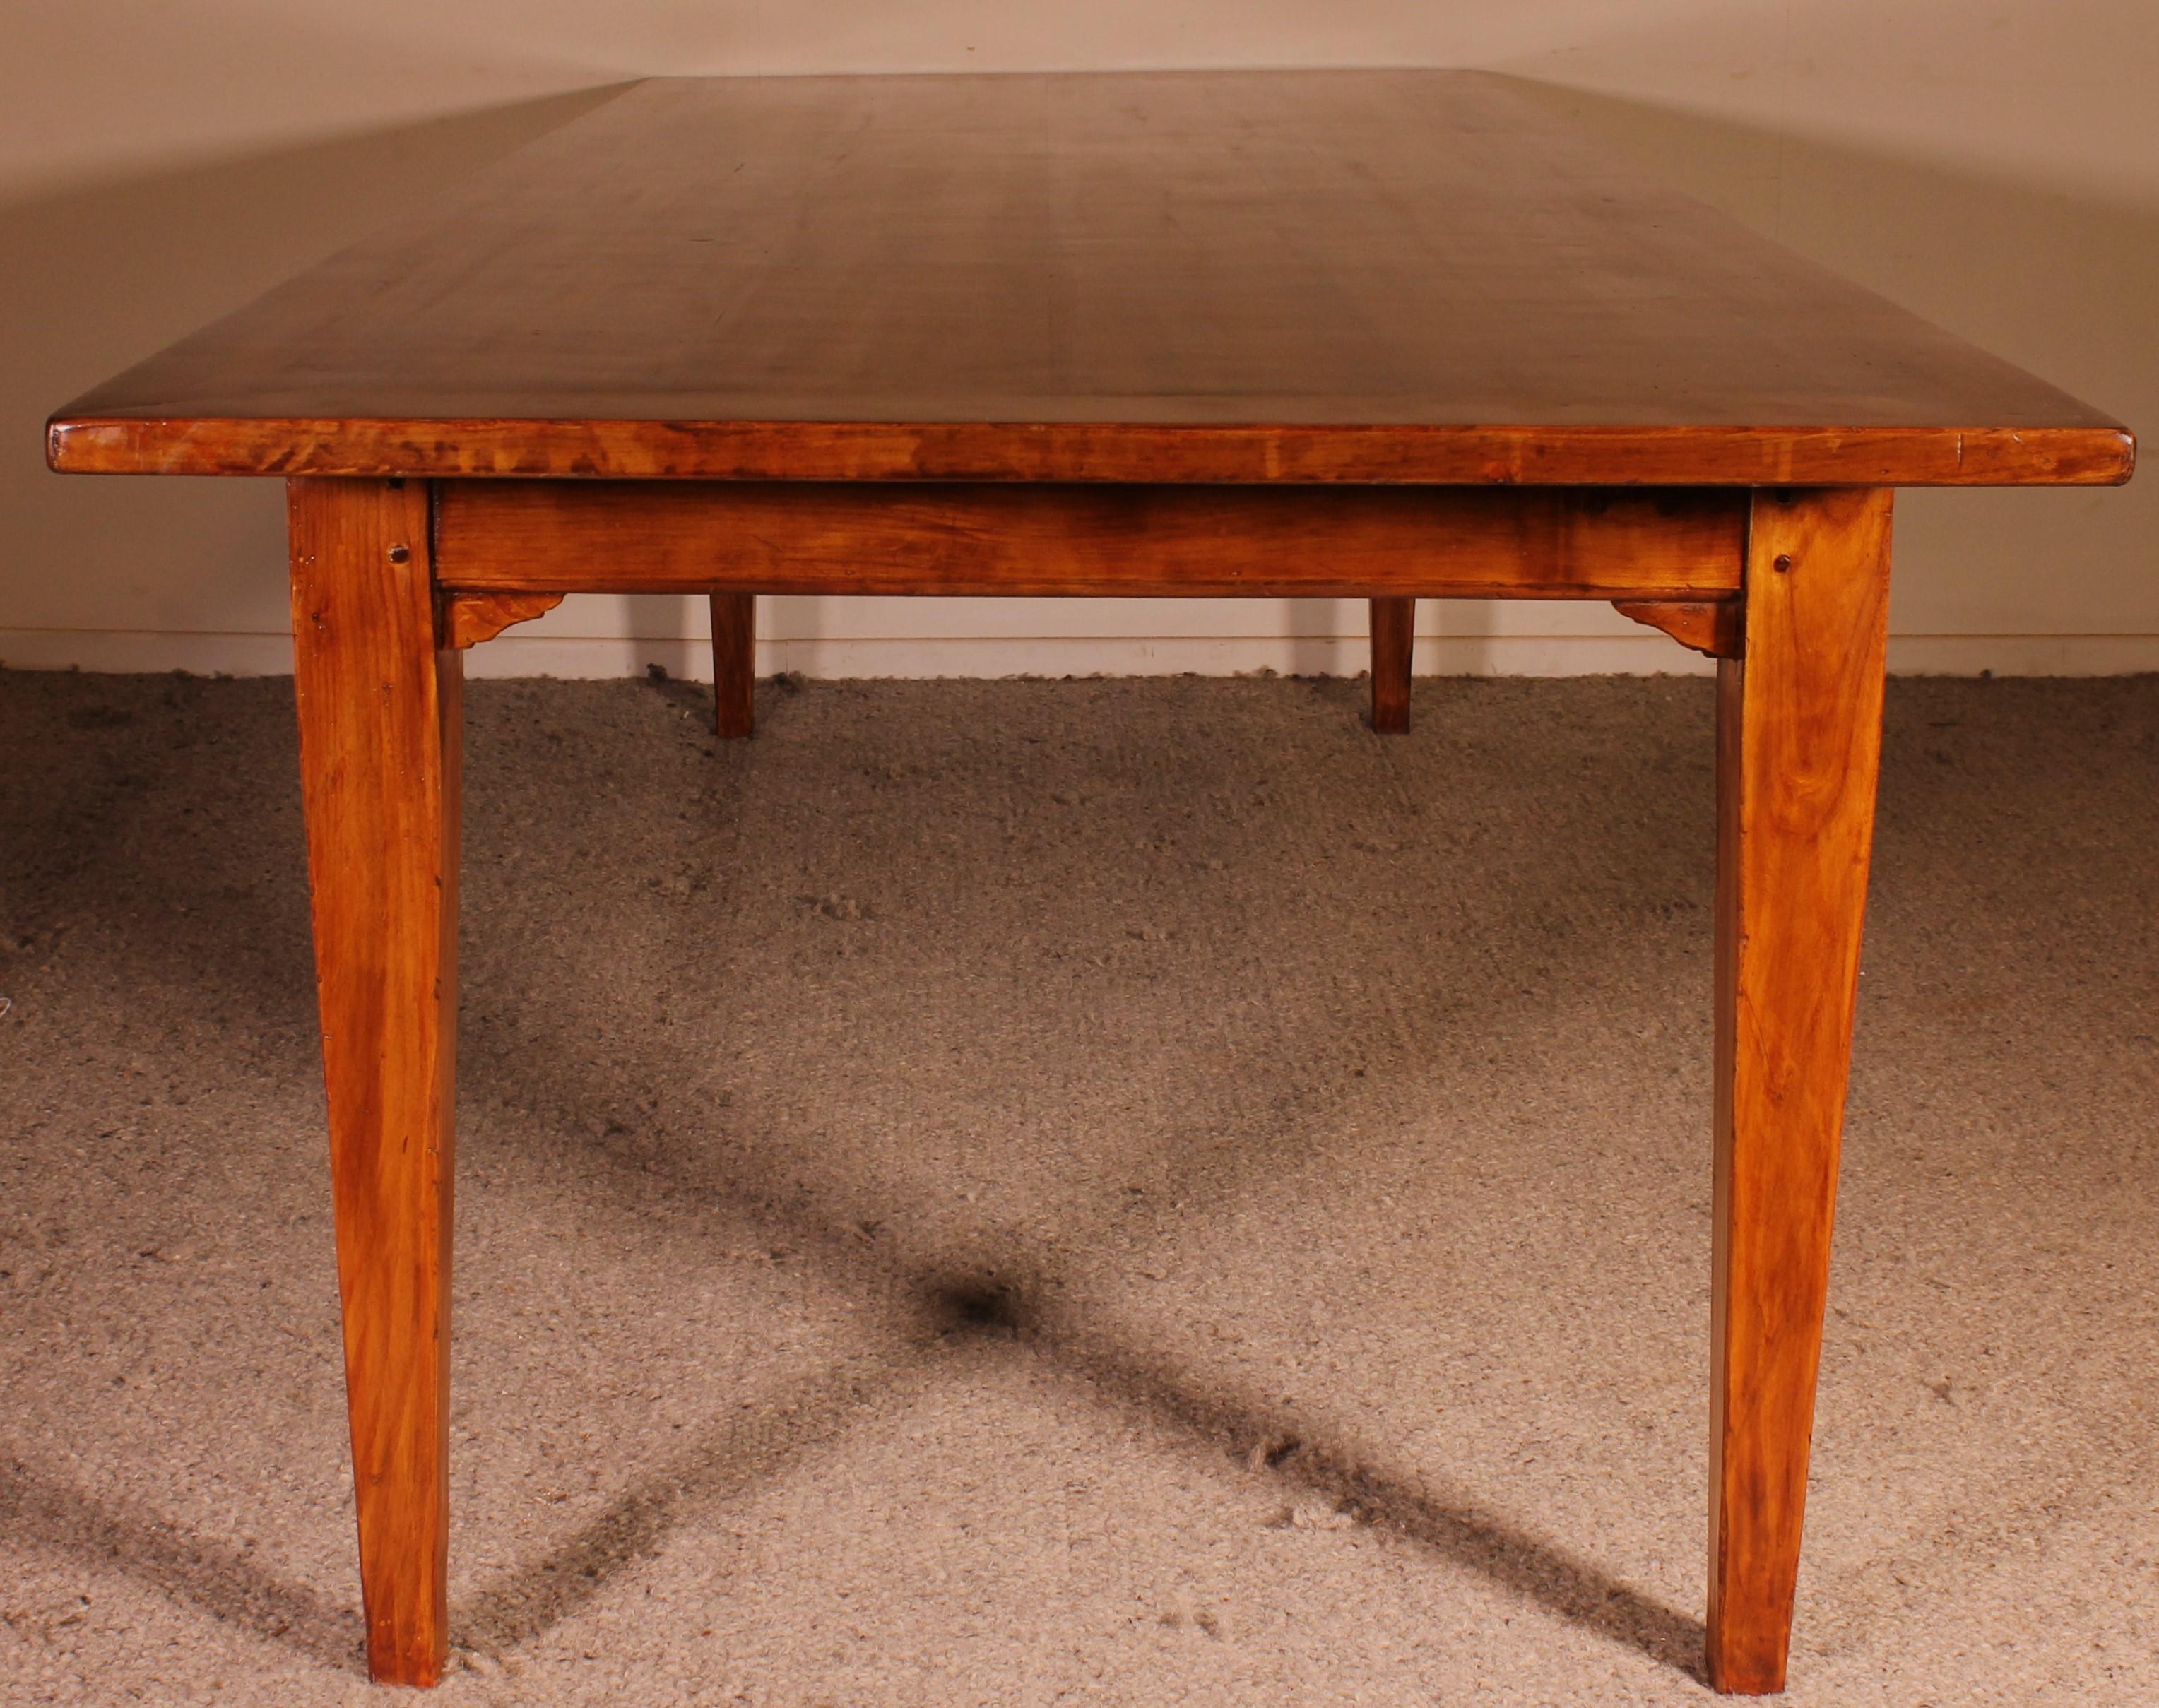 Large 19th Century Cherry Wood Refectory Table With A Width Of 100cm For Sale 1